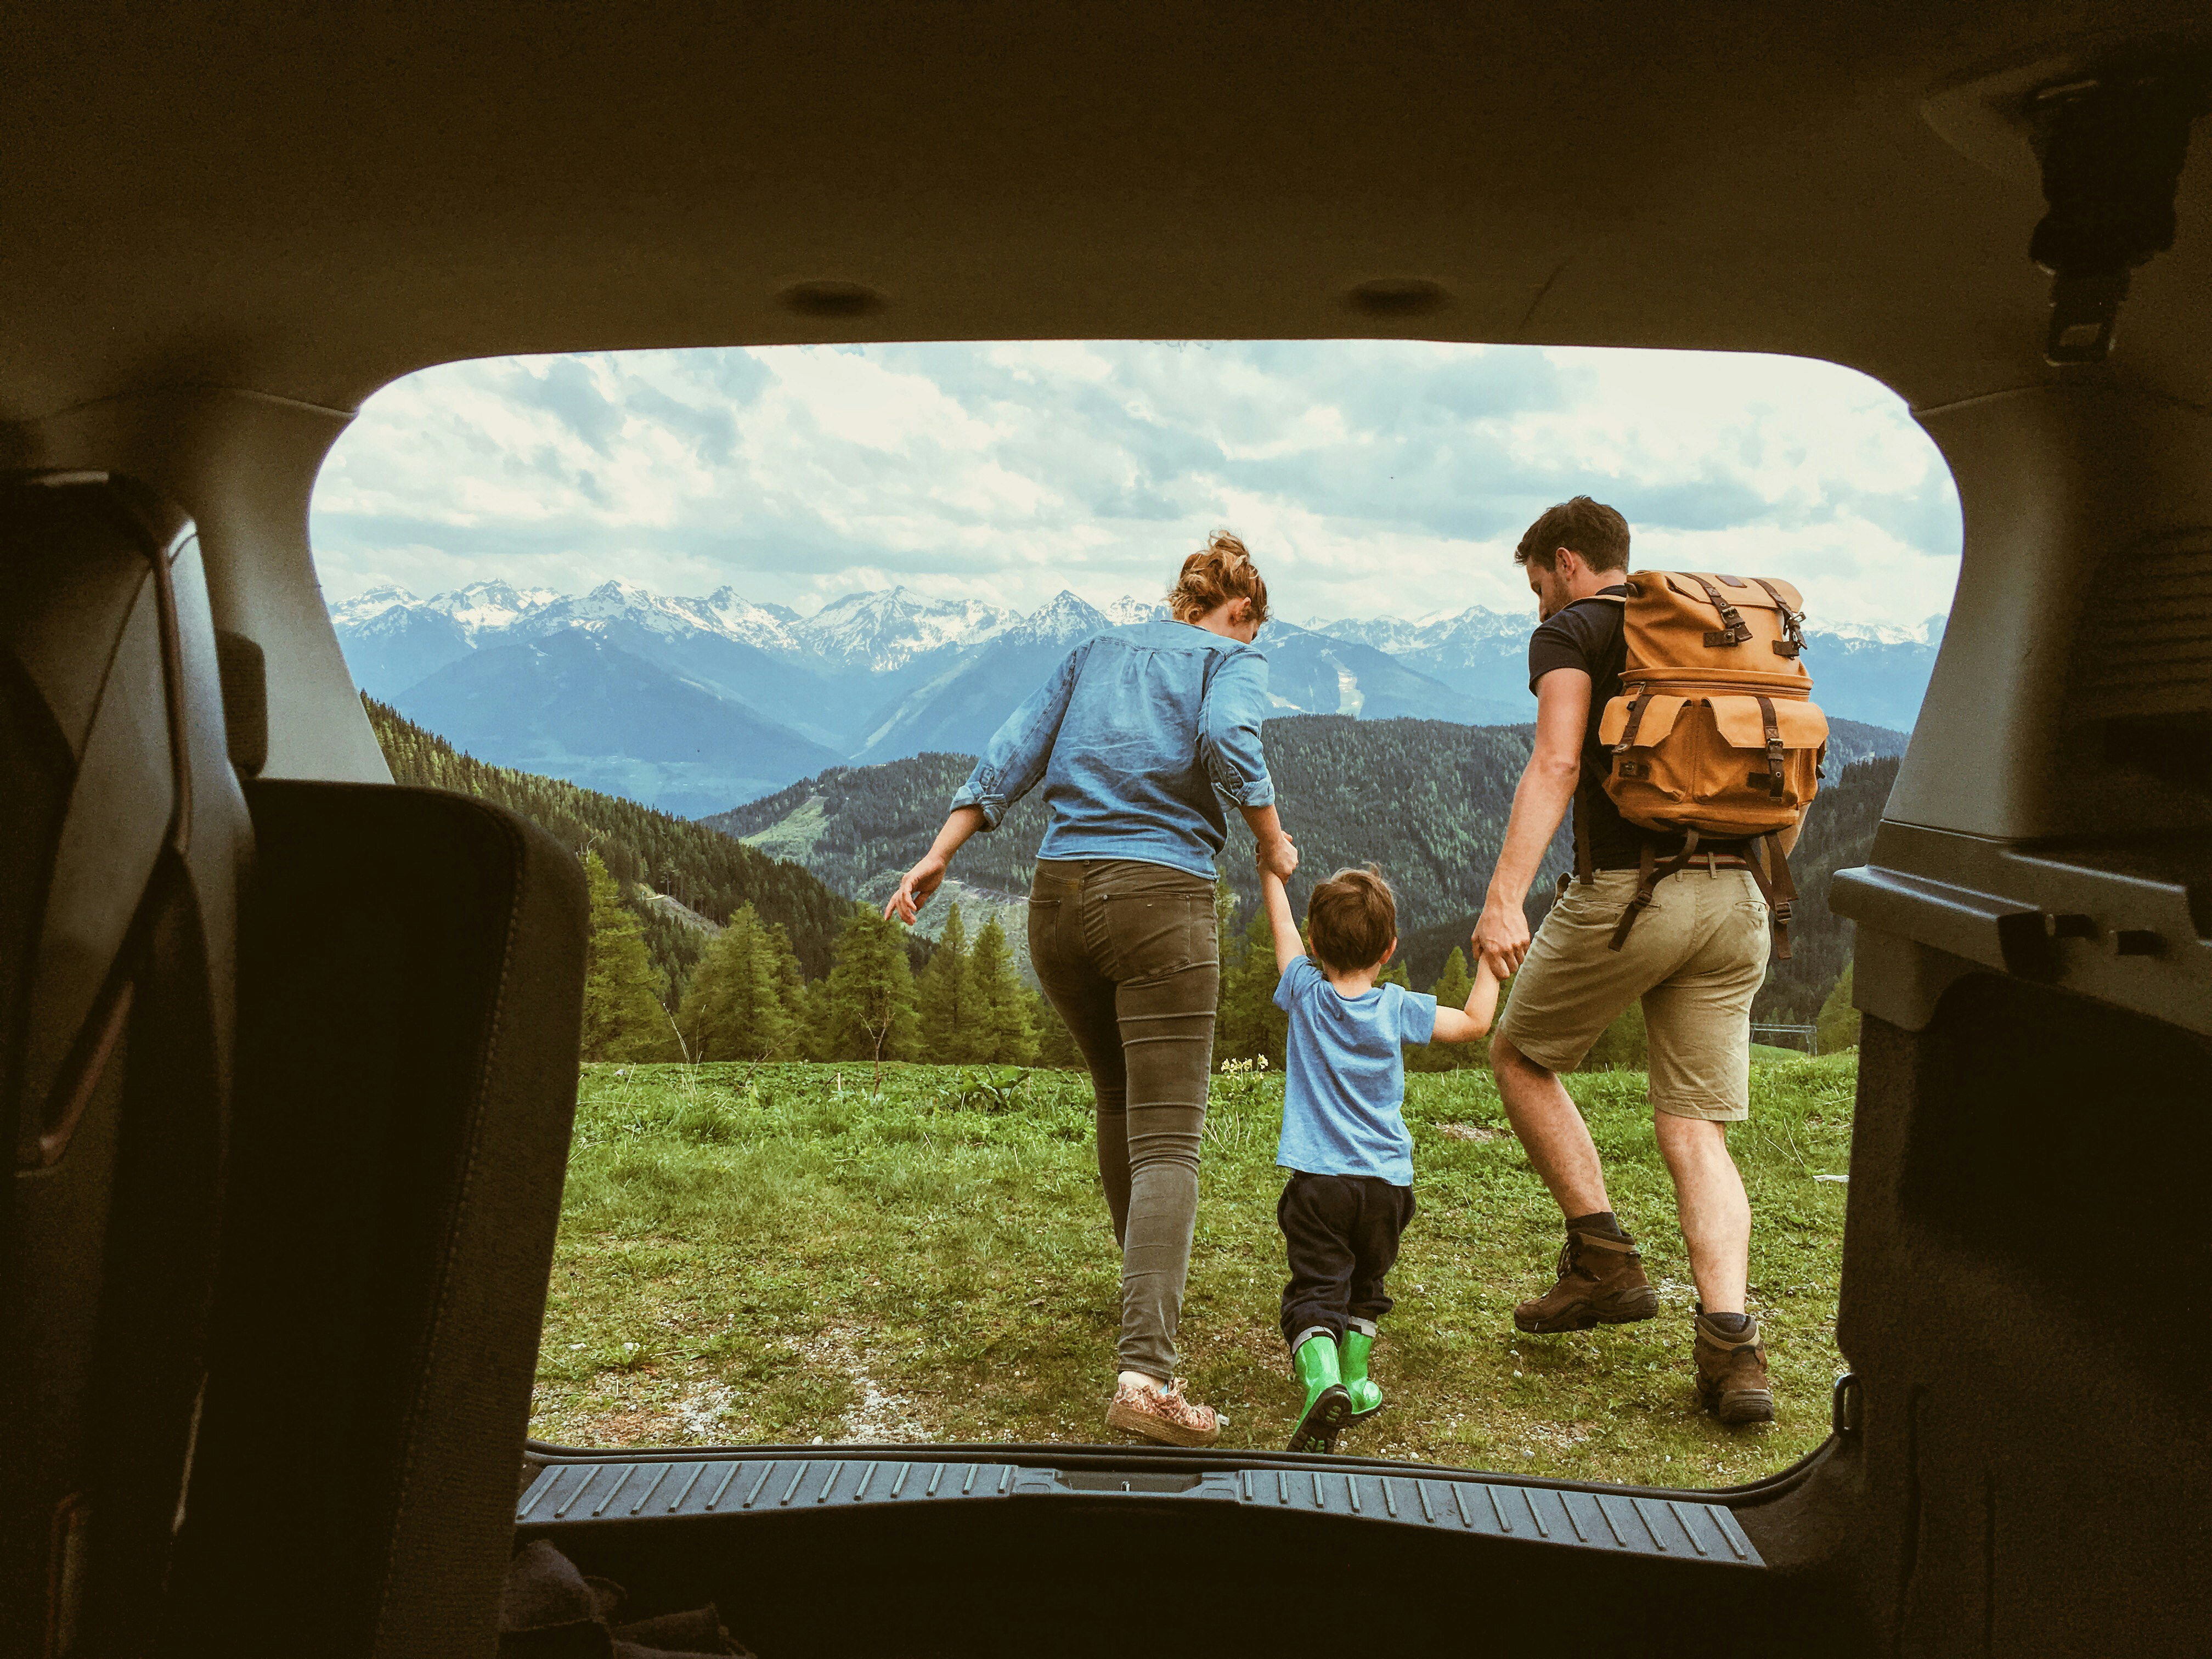 A view from inside a vehicle of a boy standing between a woman and man, holding hands and looking at the mountains